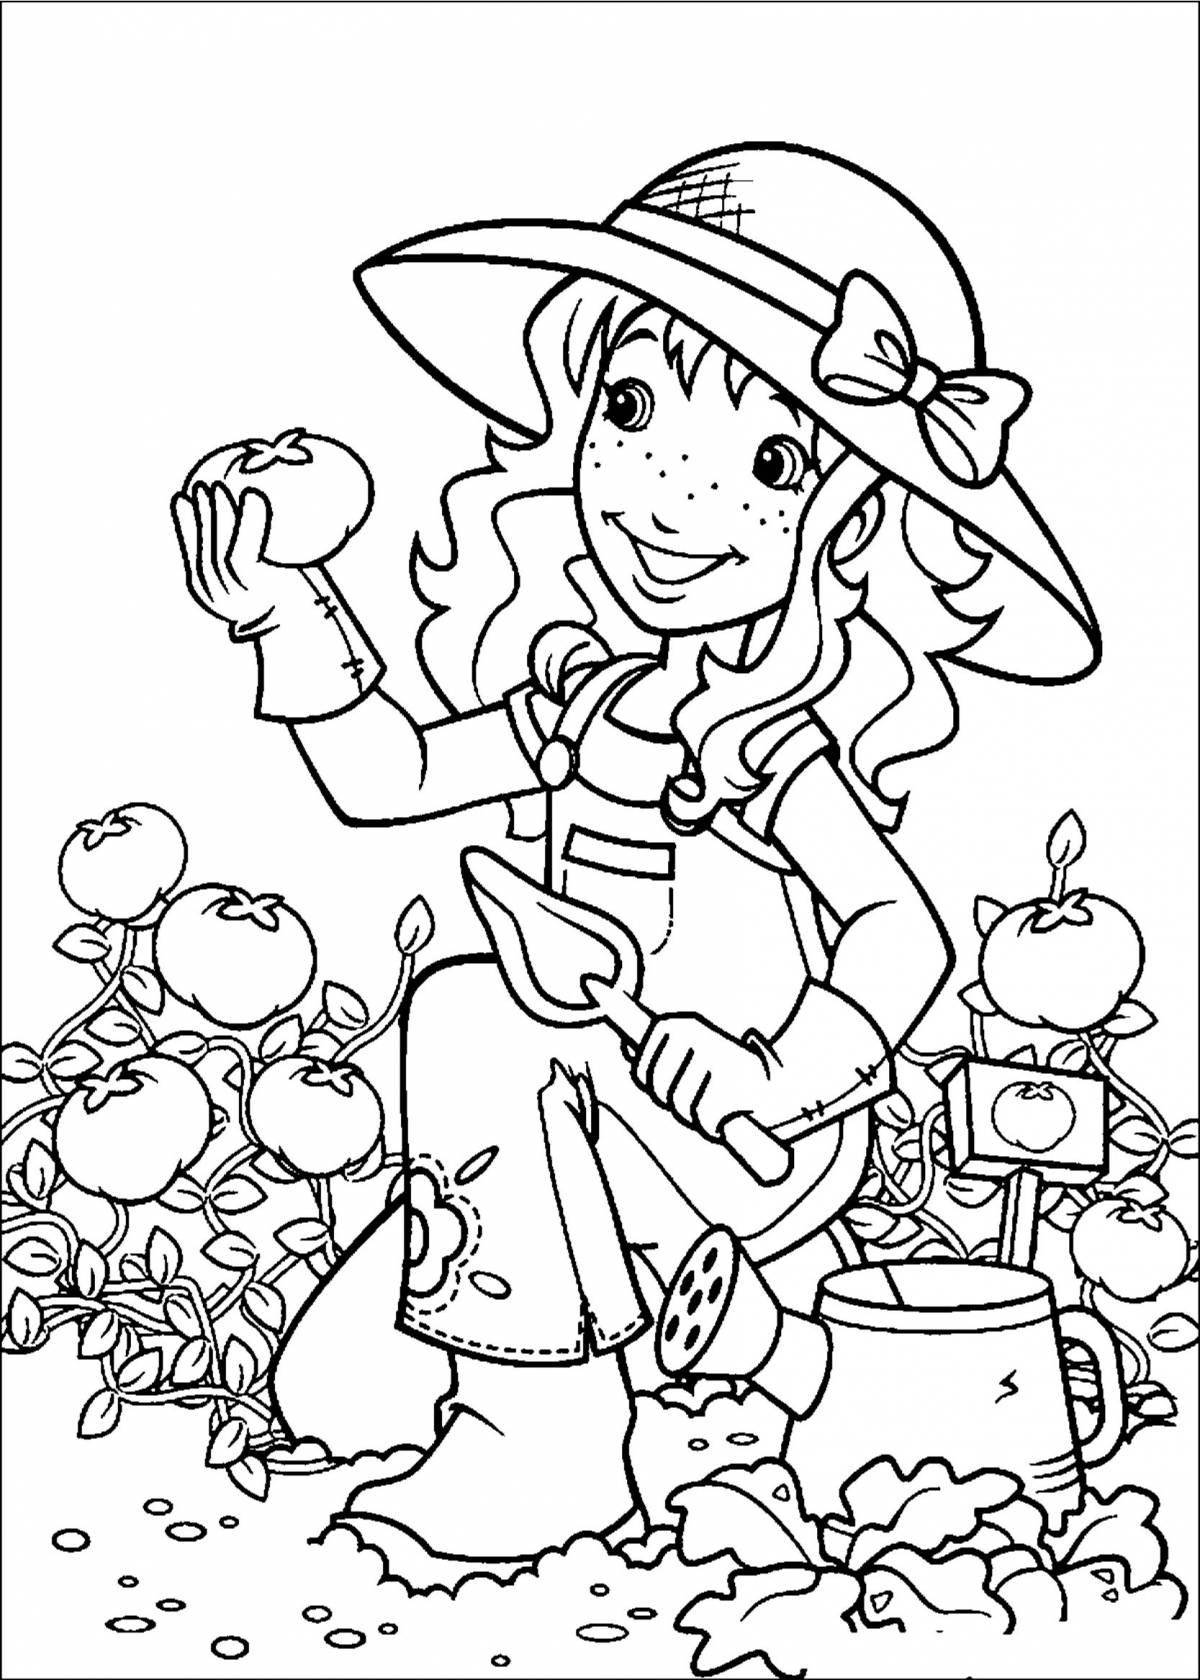 Hobby coloring book